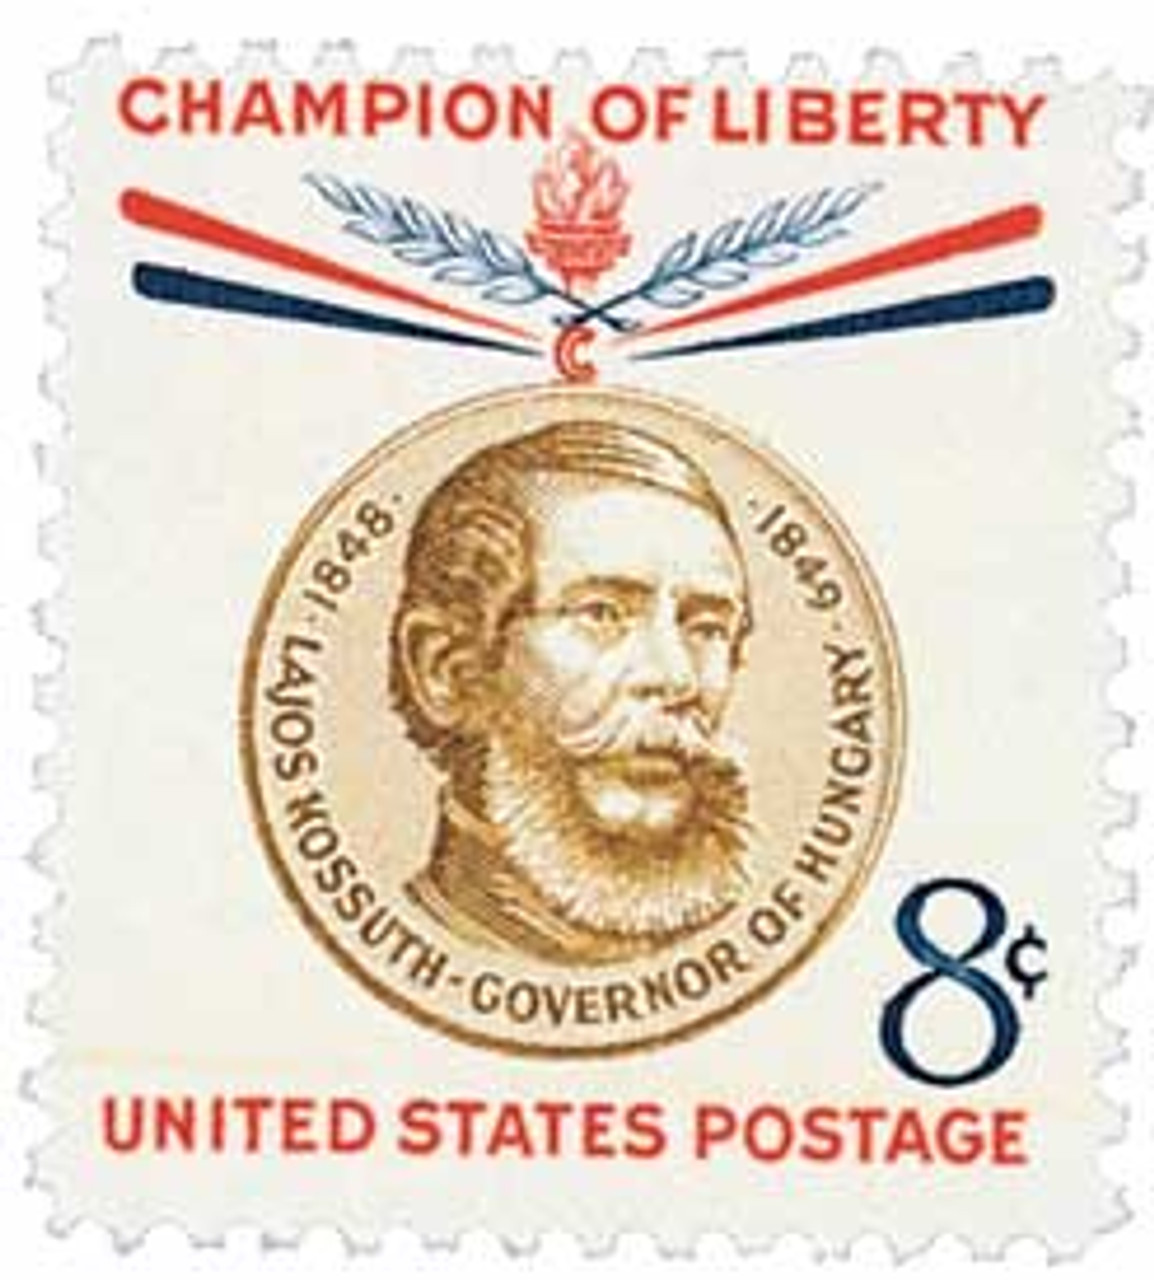 CLUBHTG - Heritage Collection Introductory Offer - US Stamps 1900